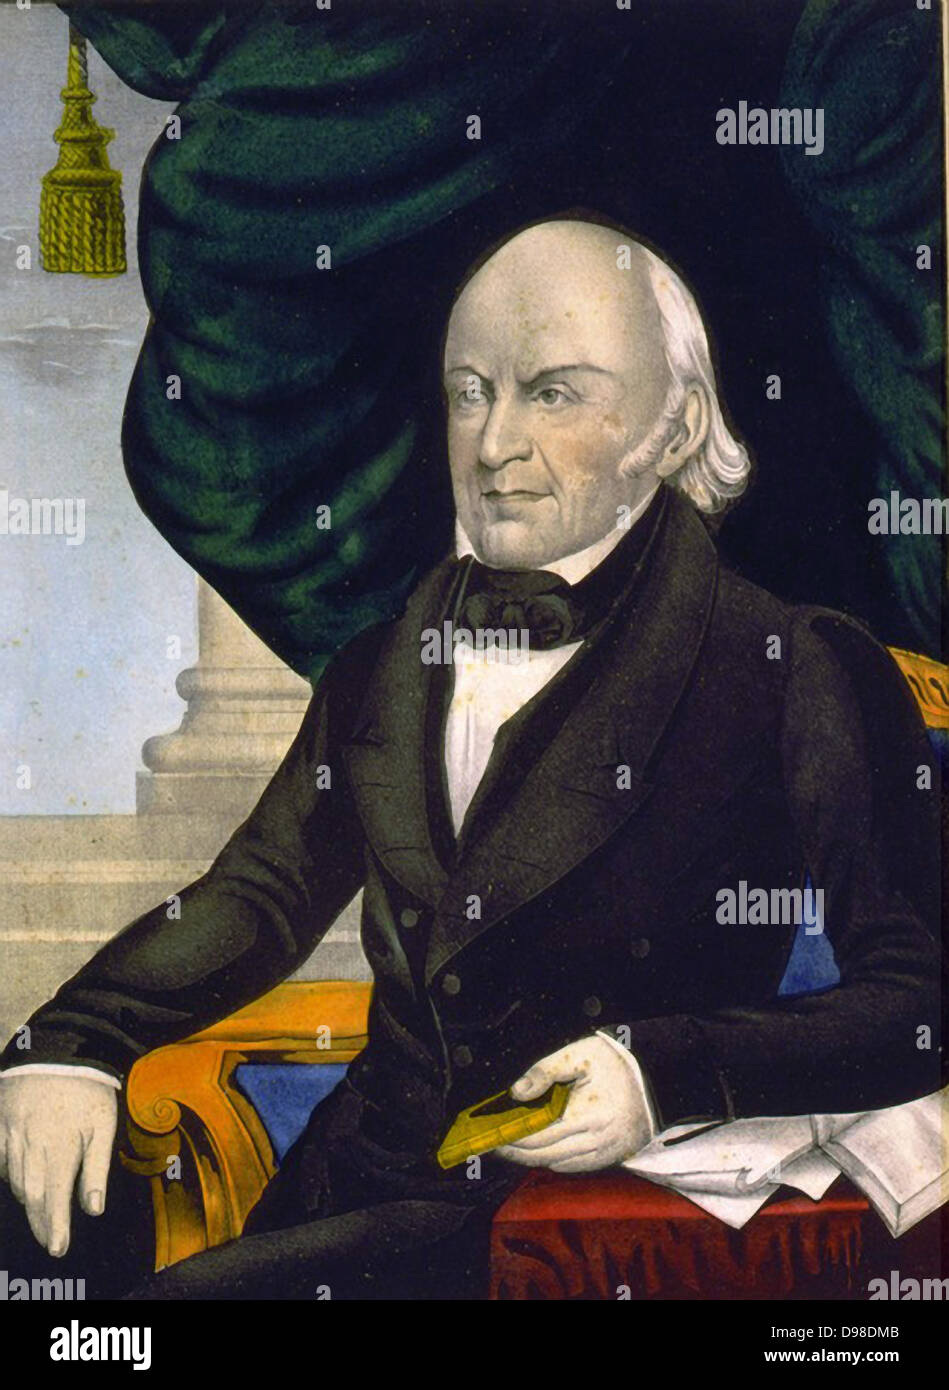 John Quincy Adams (1767-1848) American diplomat and Sixth President of the United States of America 1825-1829. Half-length portrait of Adams seated holding a small book. Hand-coloured lithograph c1848. Stock Photo